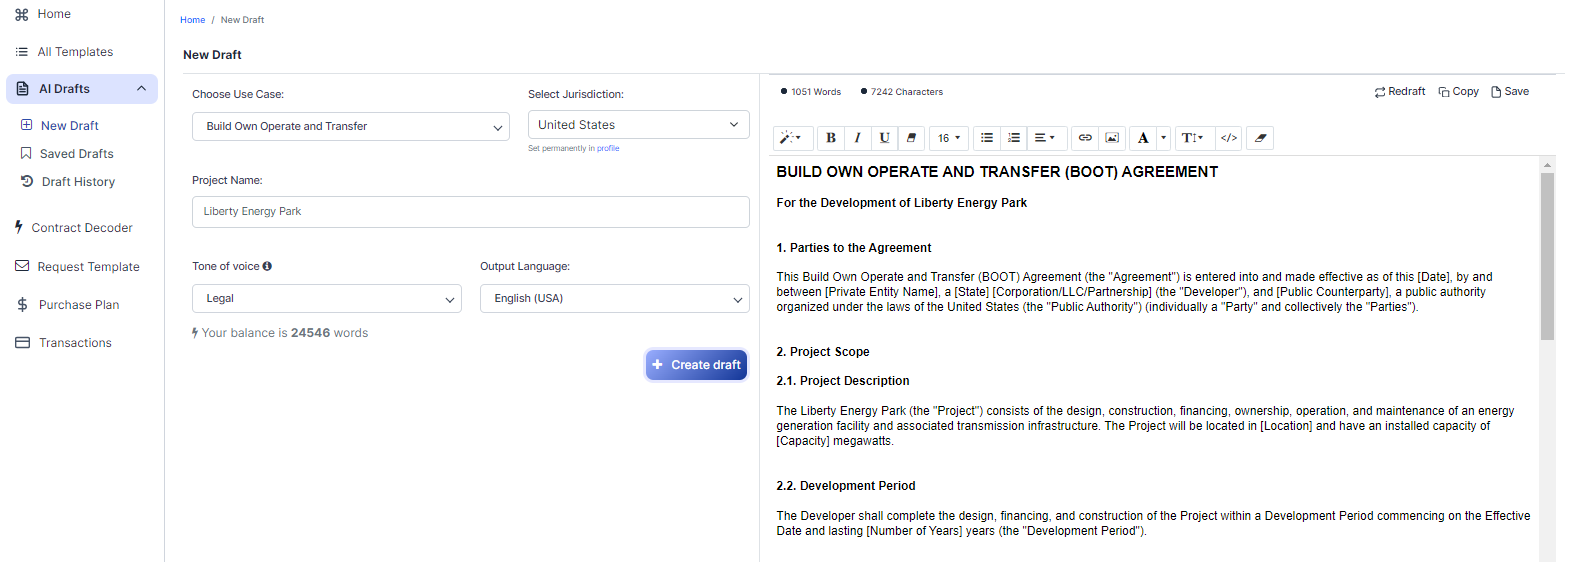 Build Own Operate and Transfer template